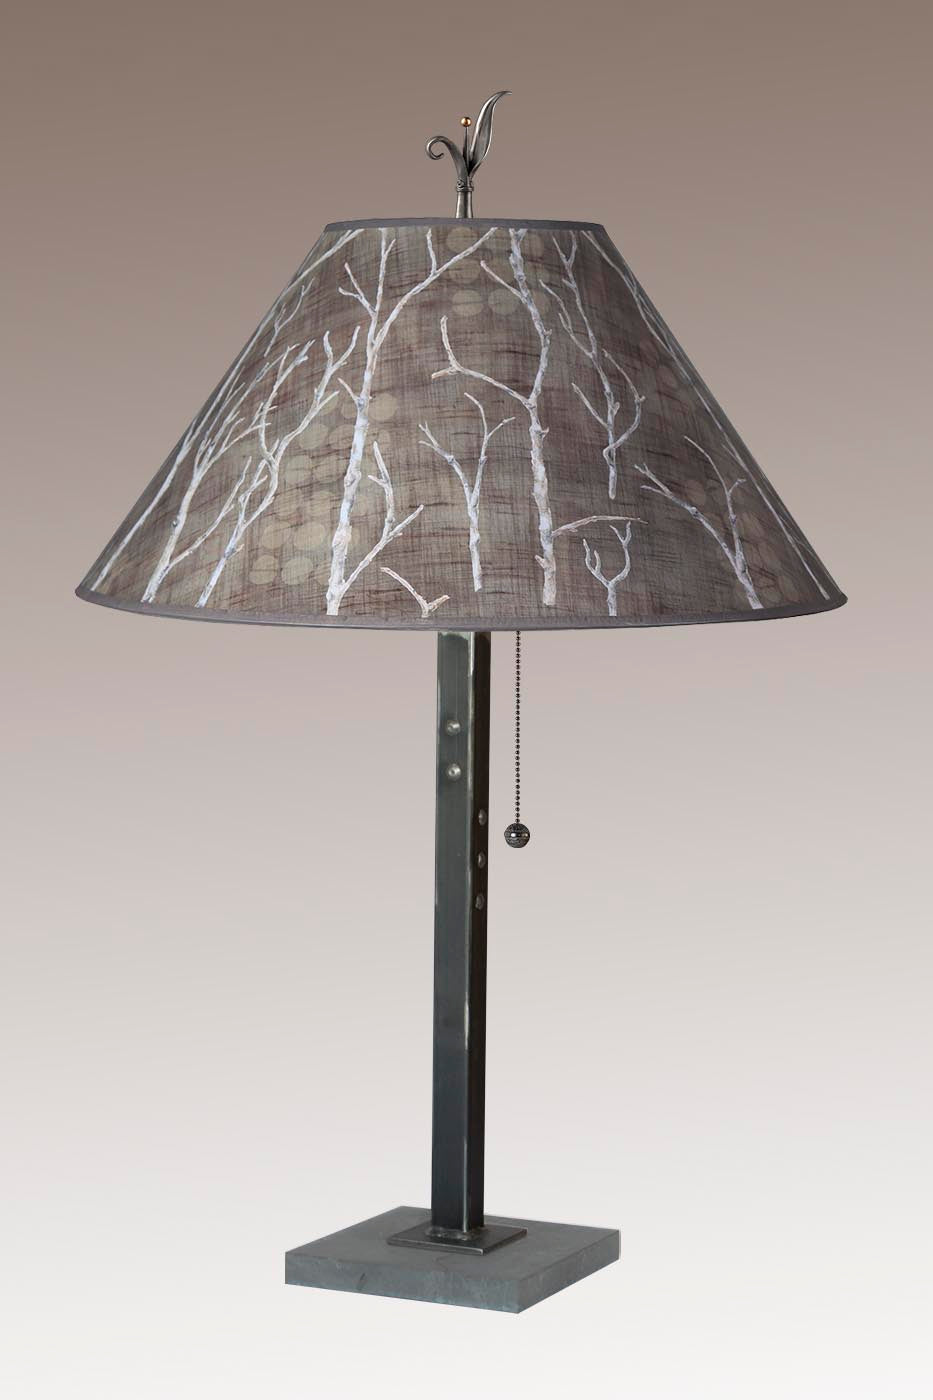 Janna Ugone &amp; Co Table Lamp Steel Table Lamp with Large Conical Shade in Twigs